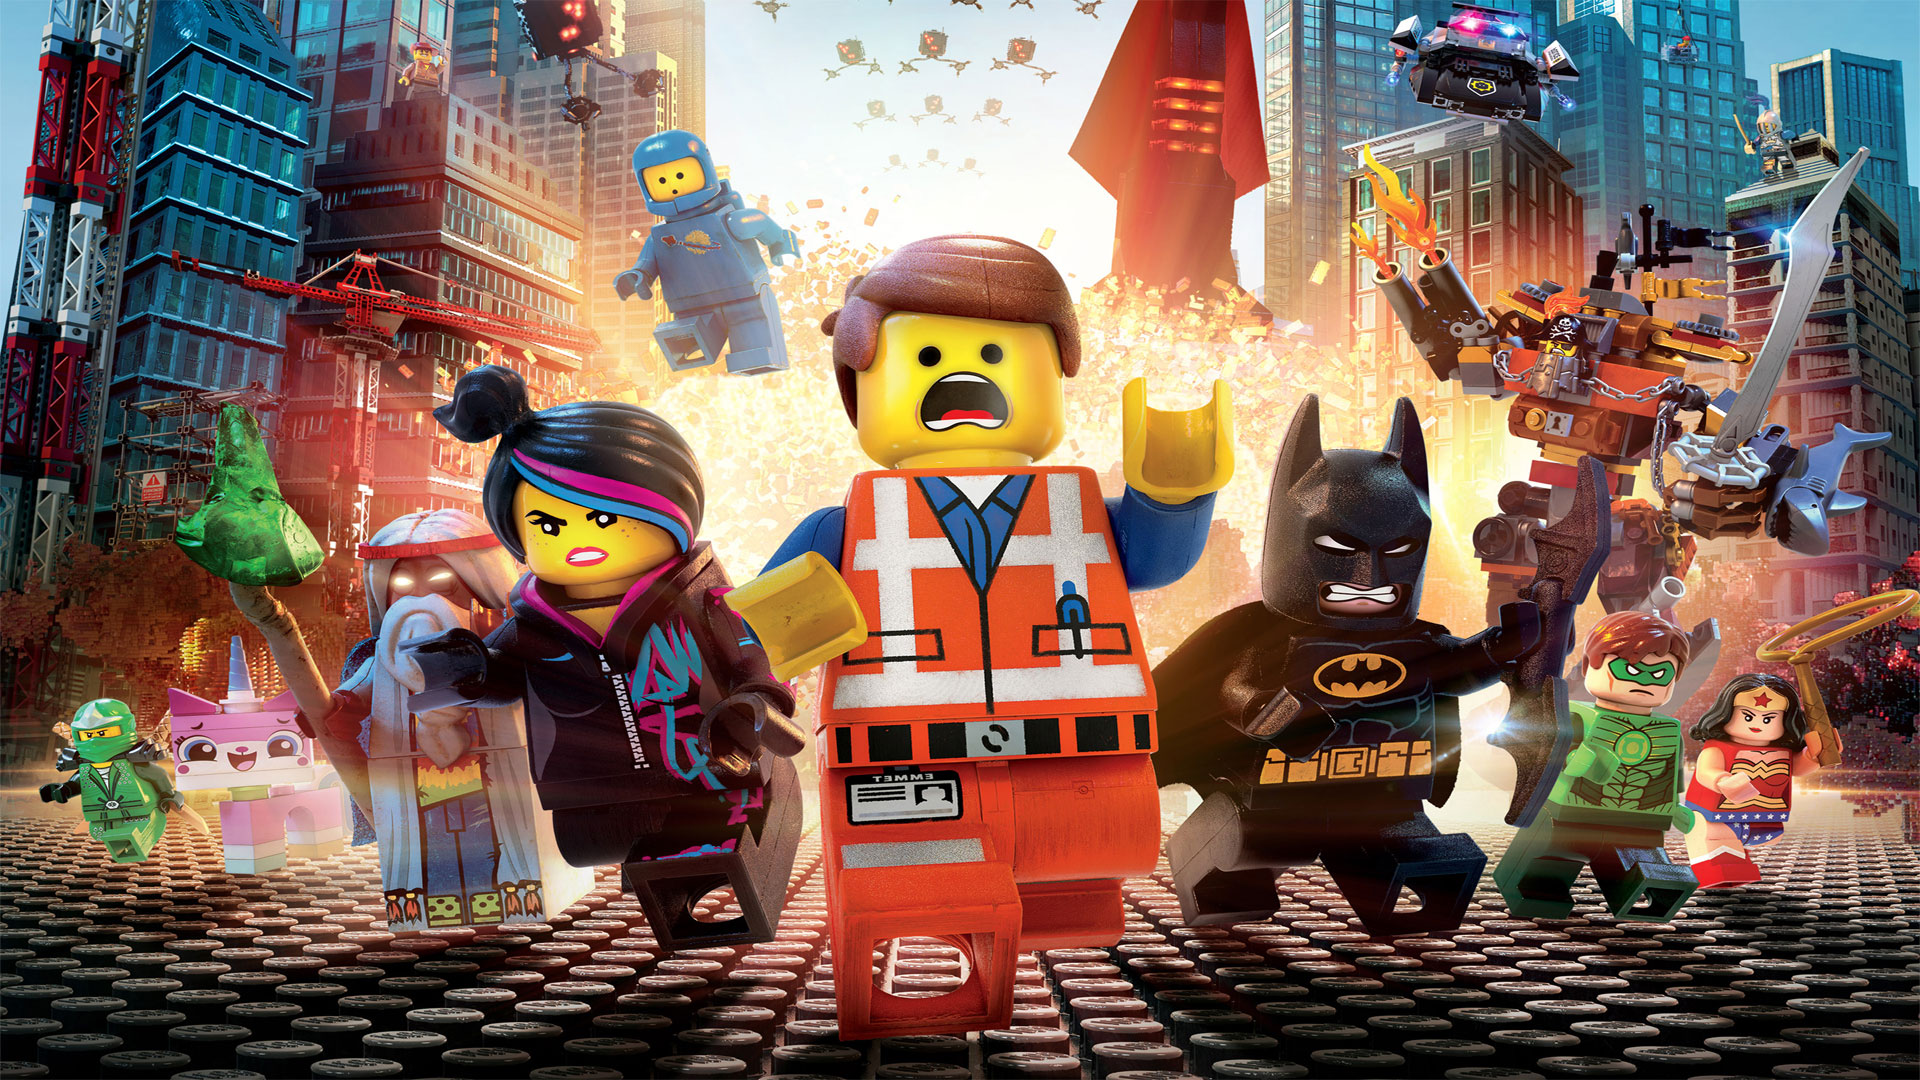 THE LEGO MOVIE Is Well Constructed